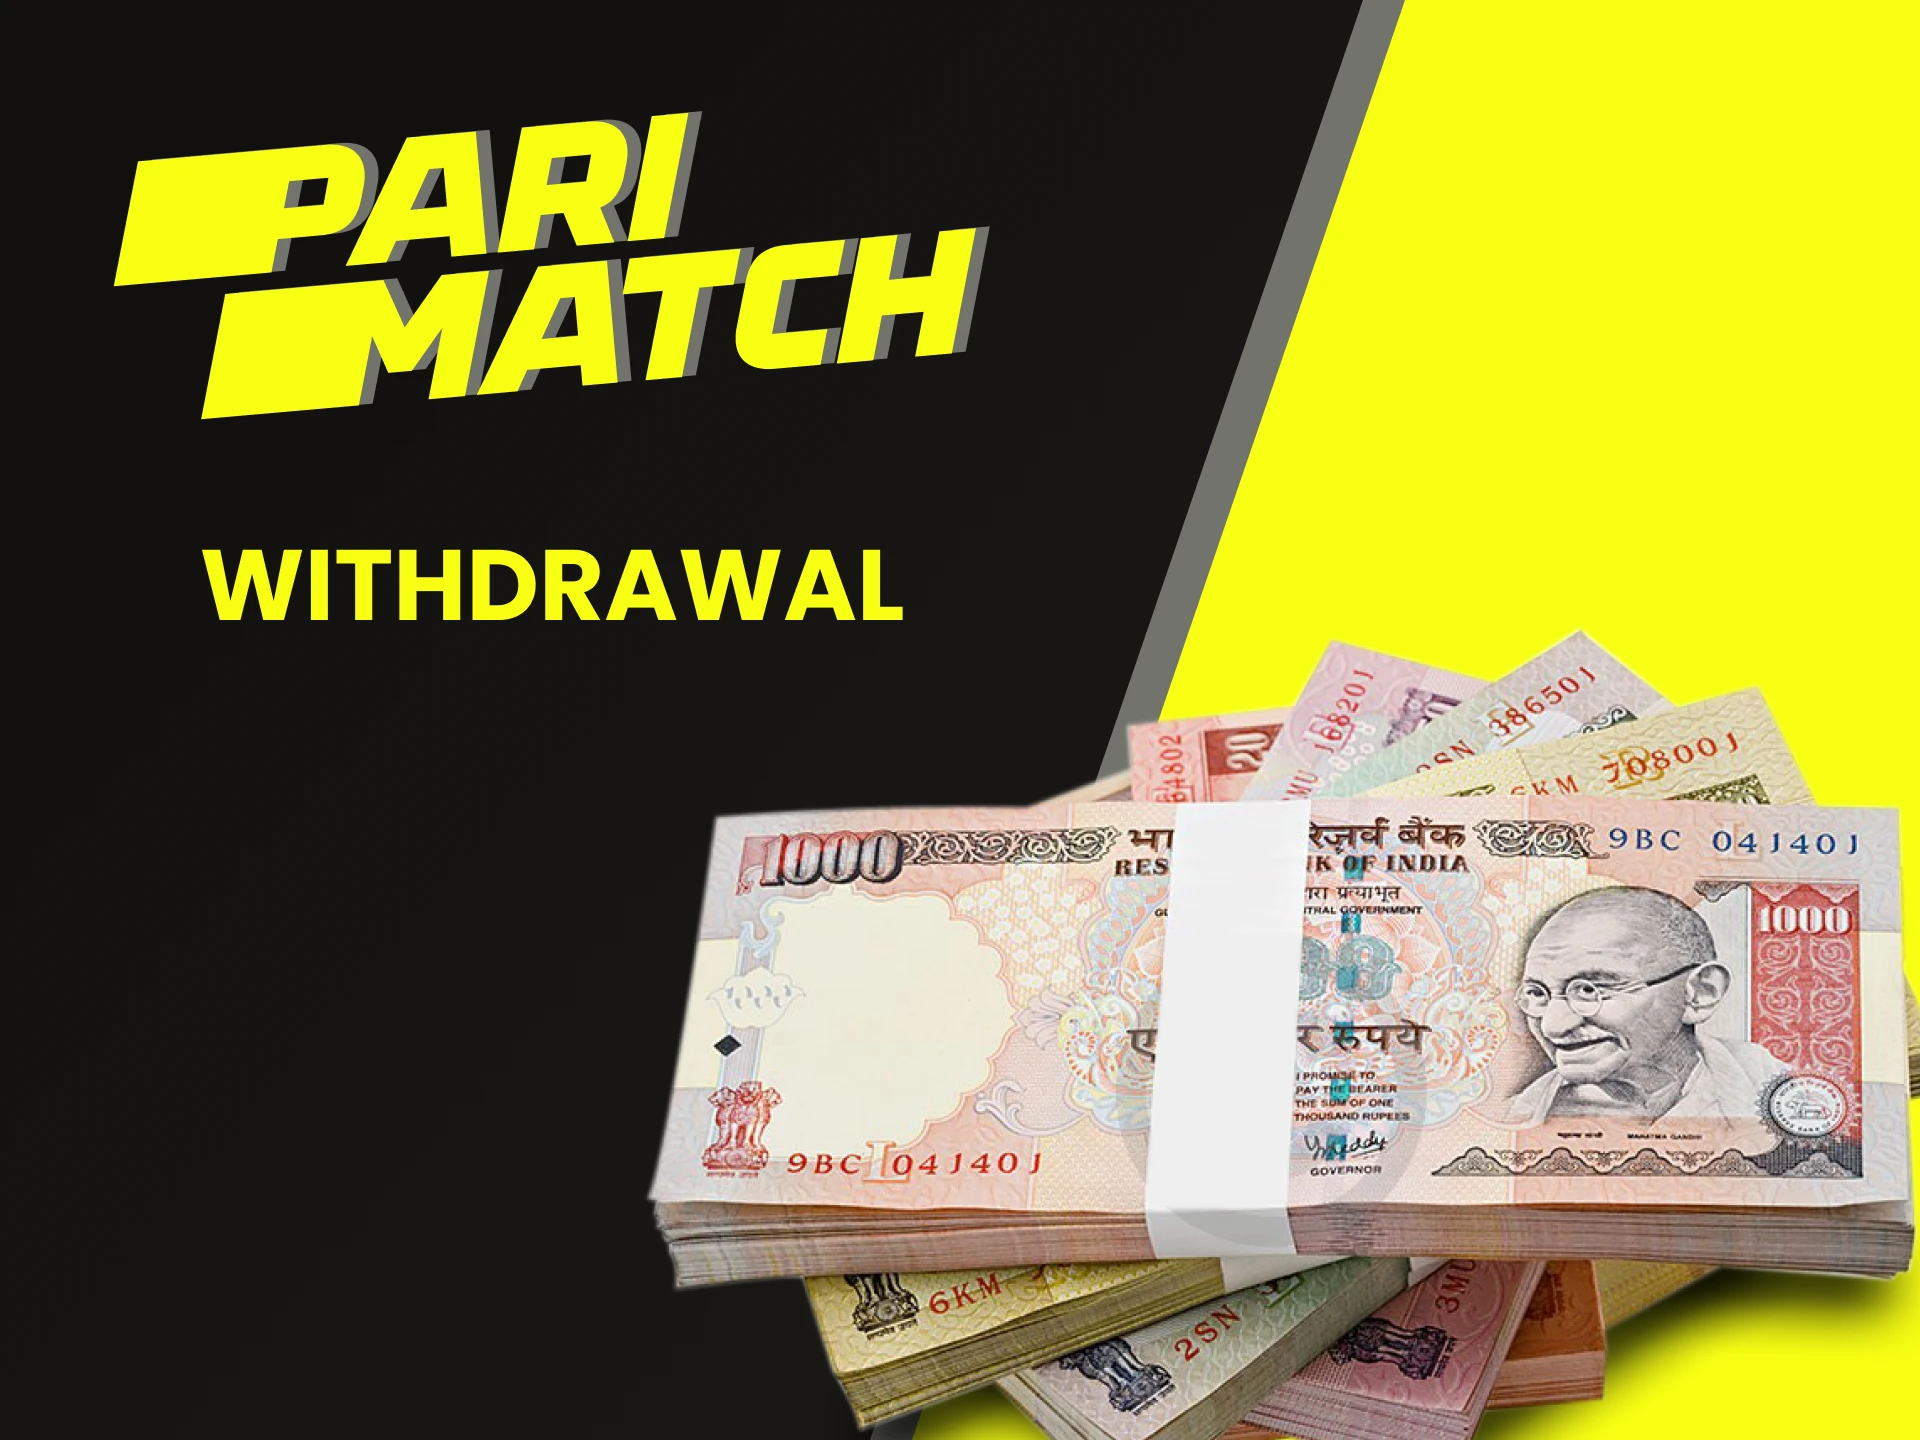 Find out how to withdraw funds on Parimatch.